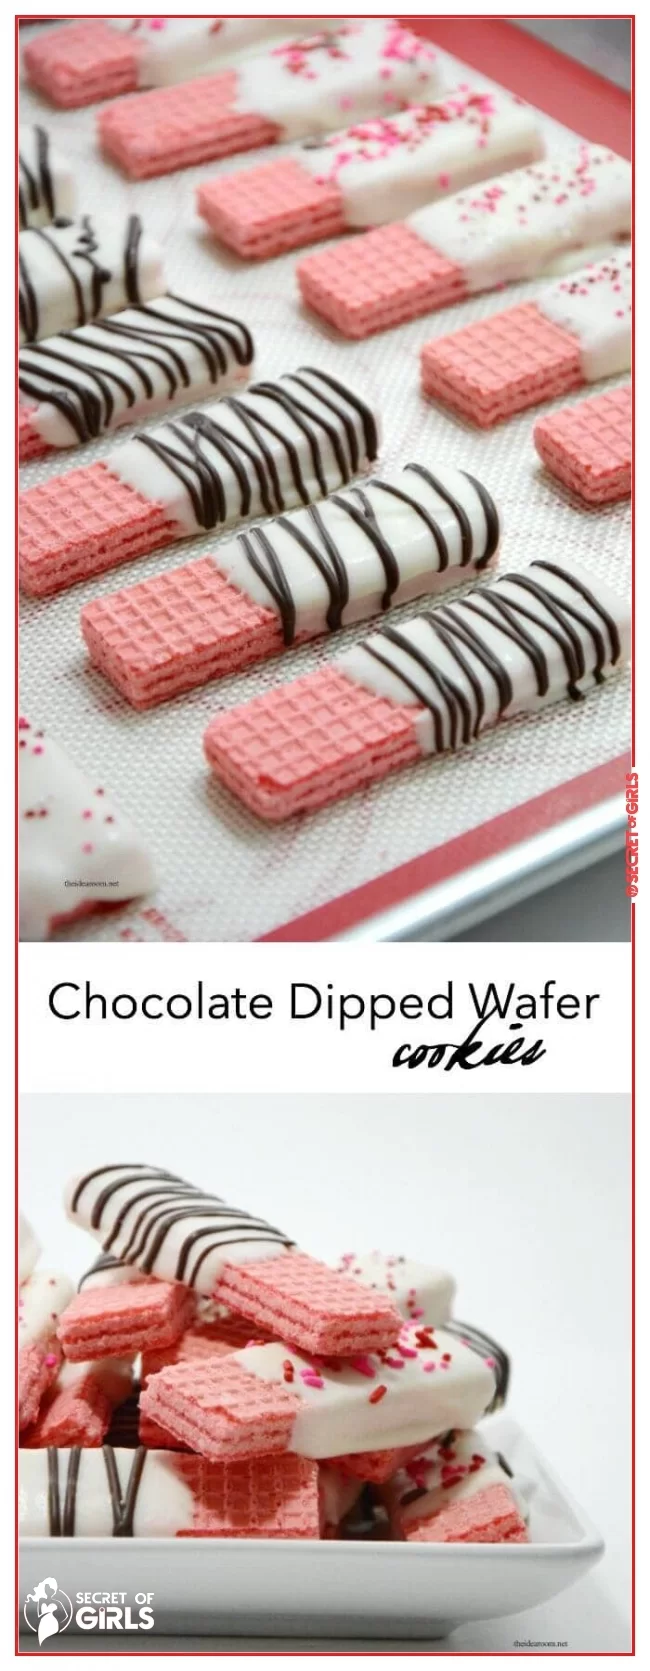 Dip a Wafer Cookie in Chocolate | 29 Adorable Valentine’s Day Candy Ideas